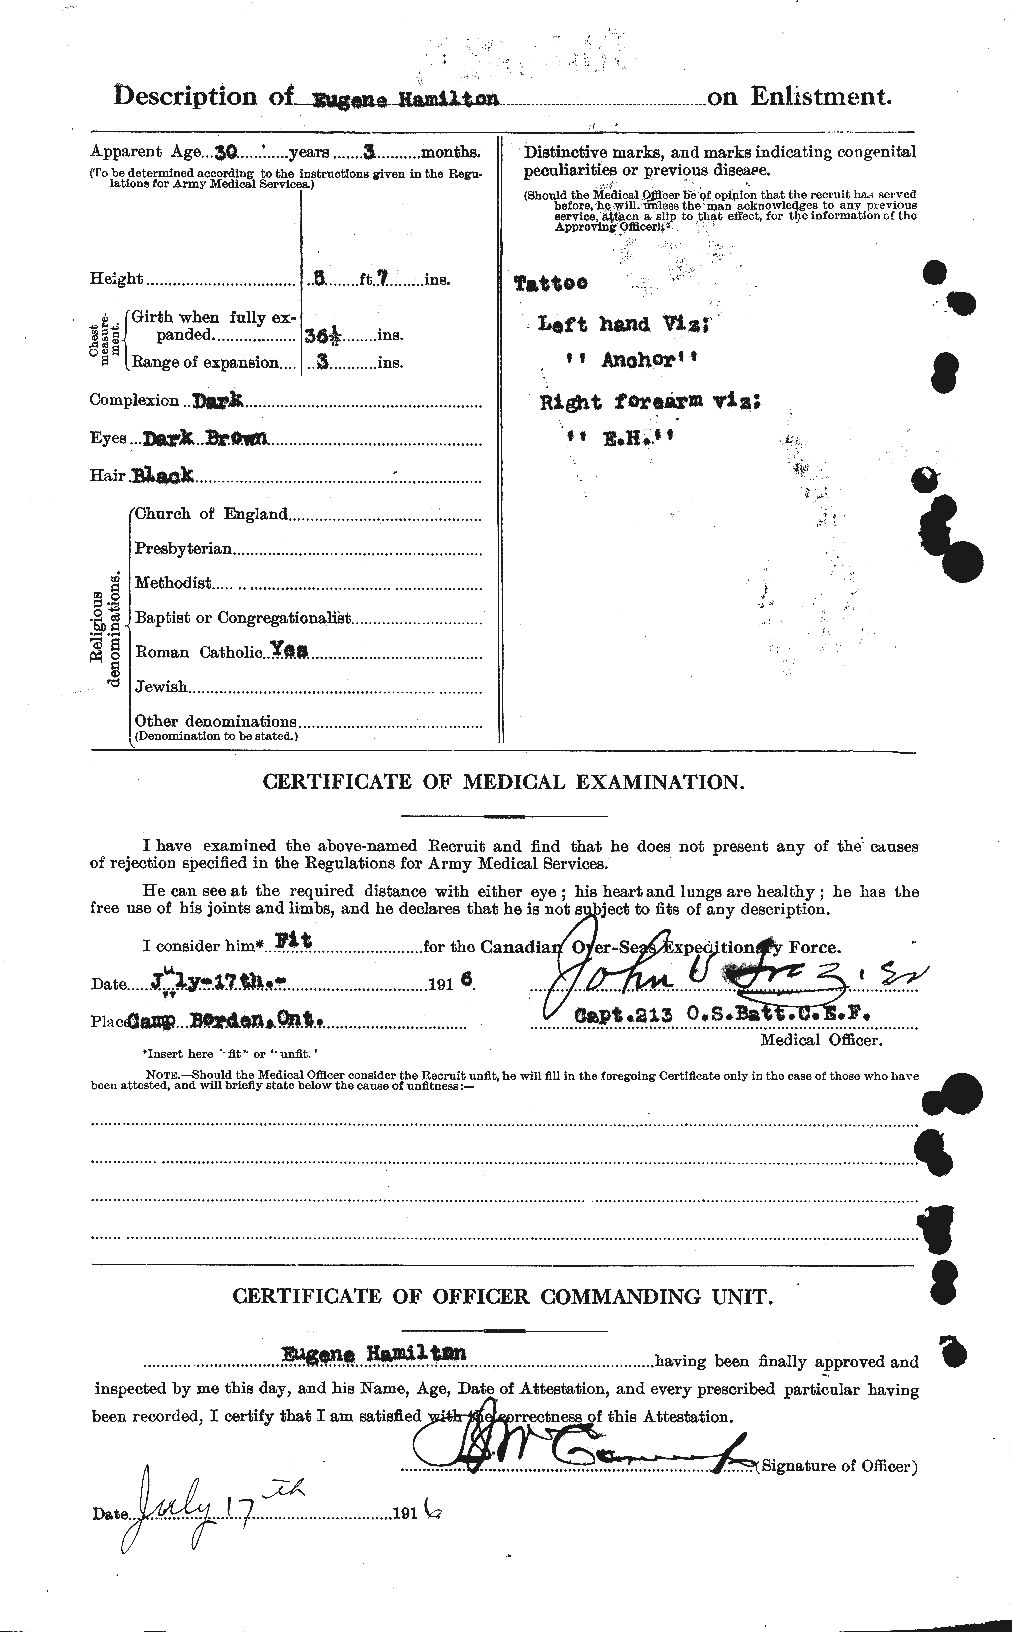 Personnel Records of the First World War - CEF 375393b